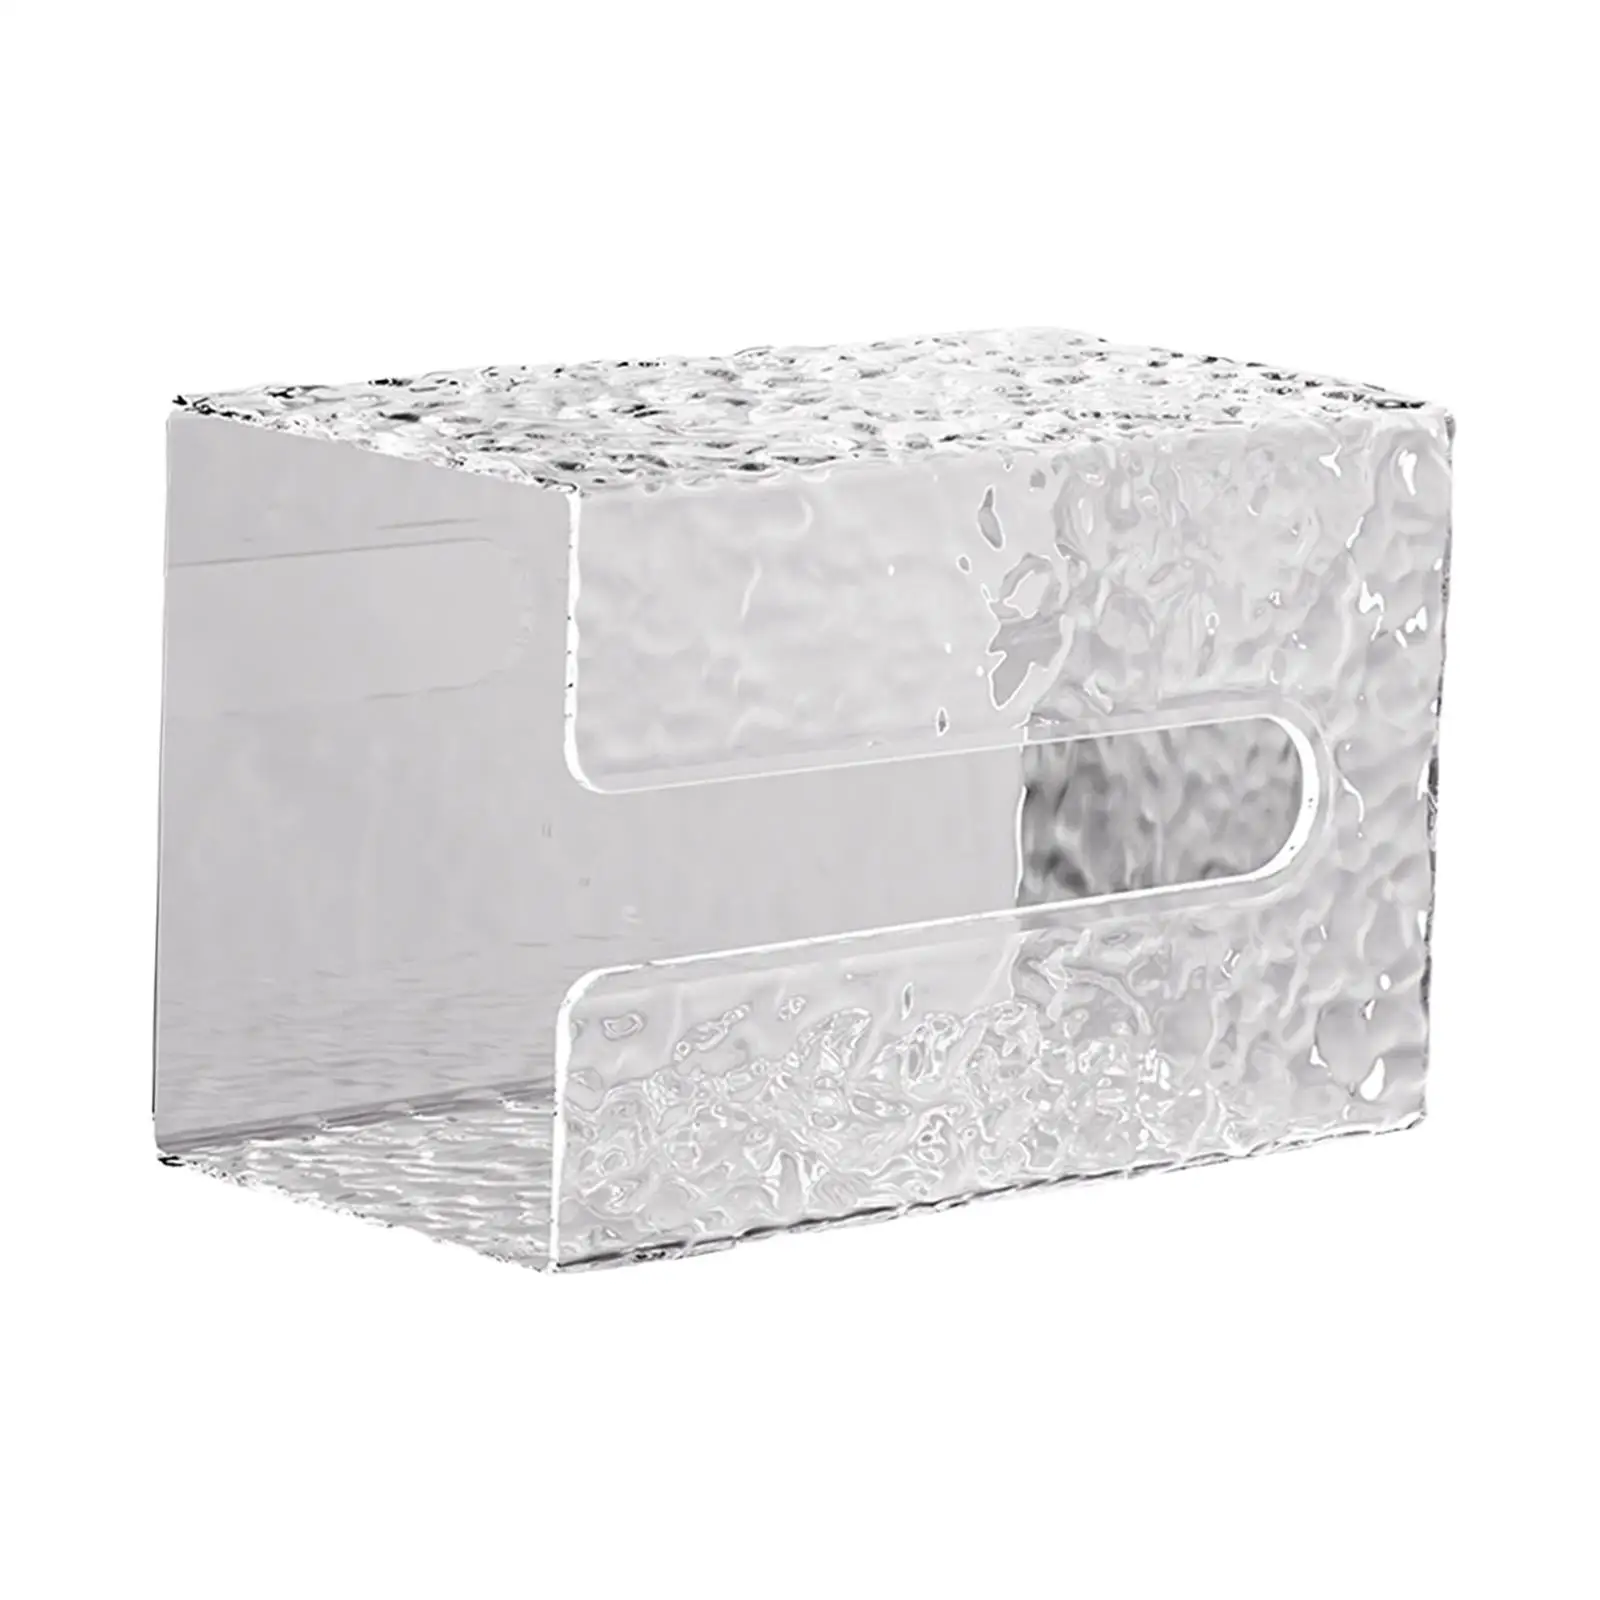 Tissue Paper Cover Wall Mounted Tissue Holder Box for Countertop Bedroom